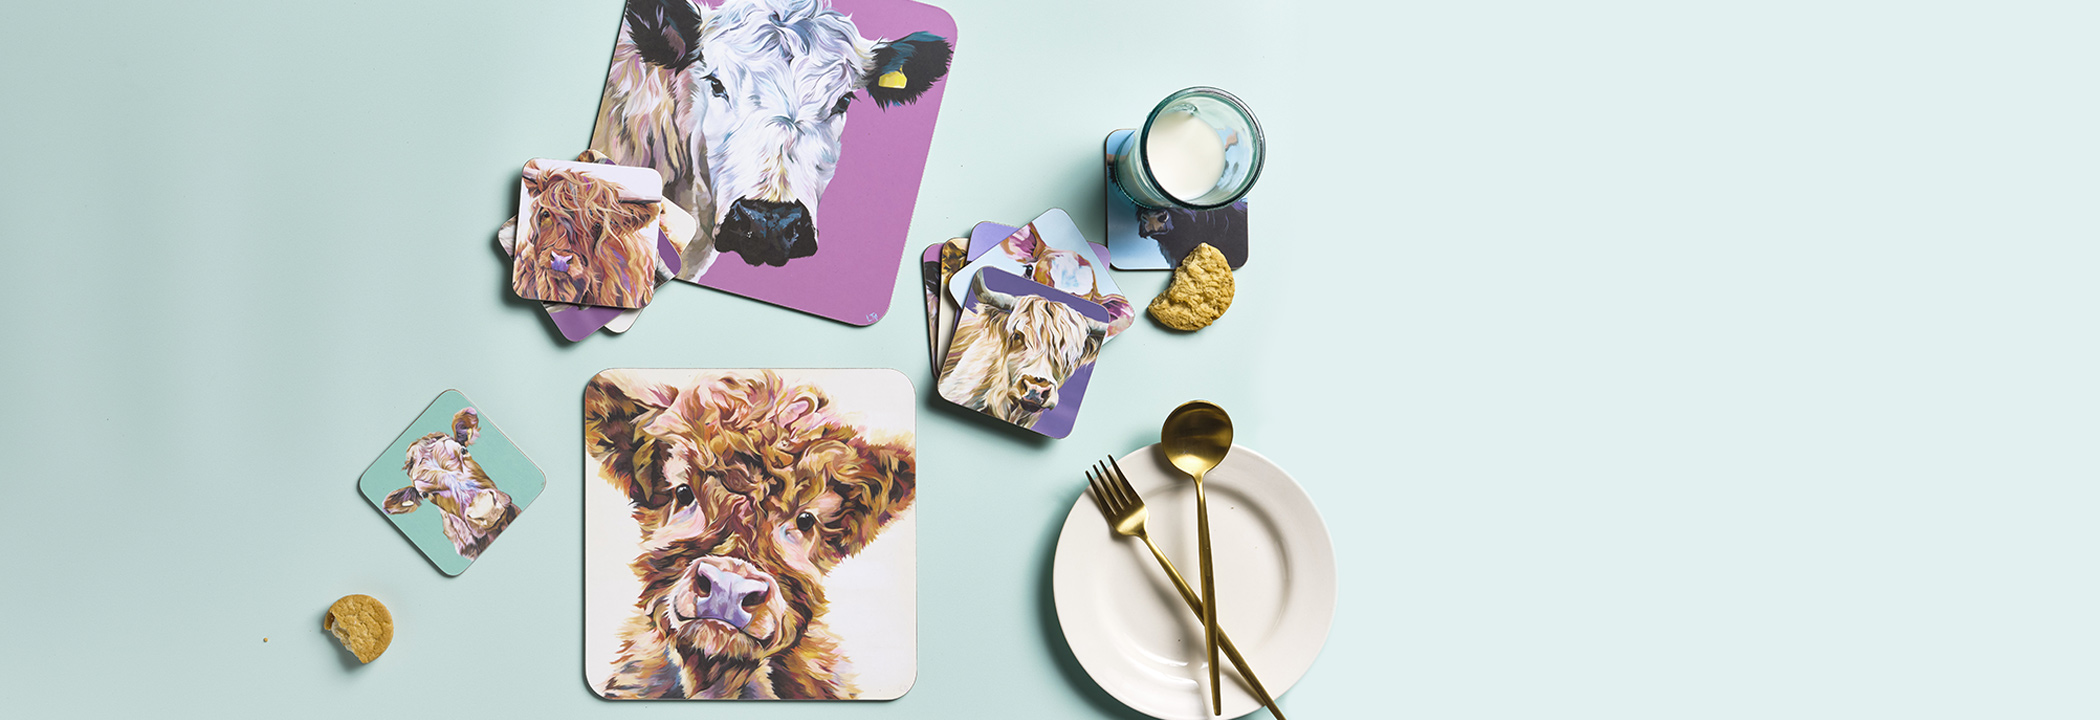 Cow Placemats and Coasters by Lauren's Cows